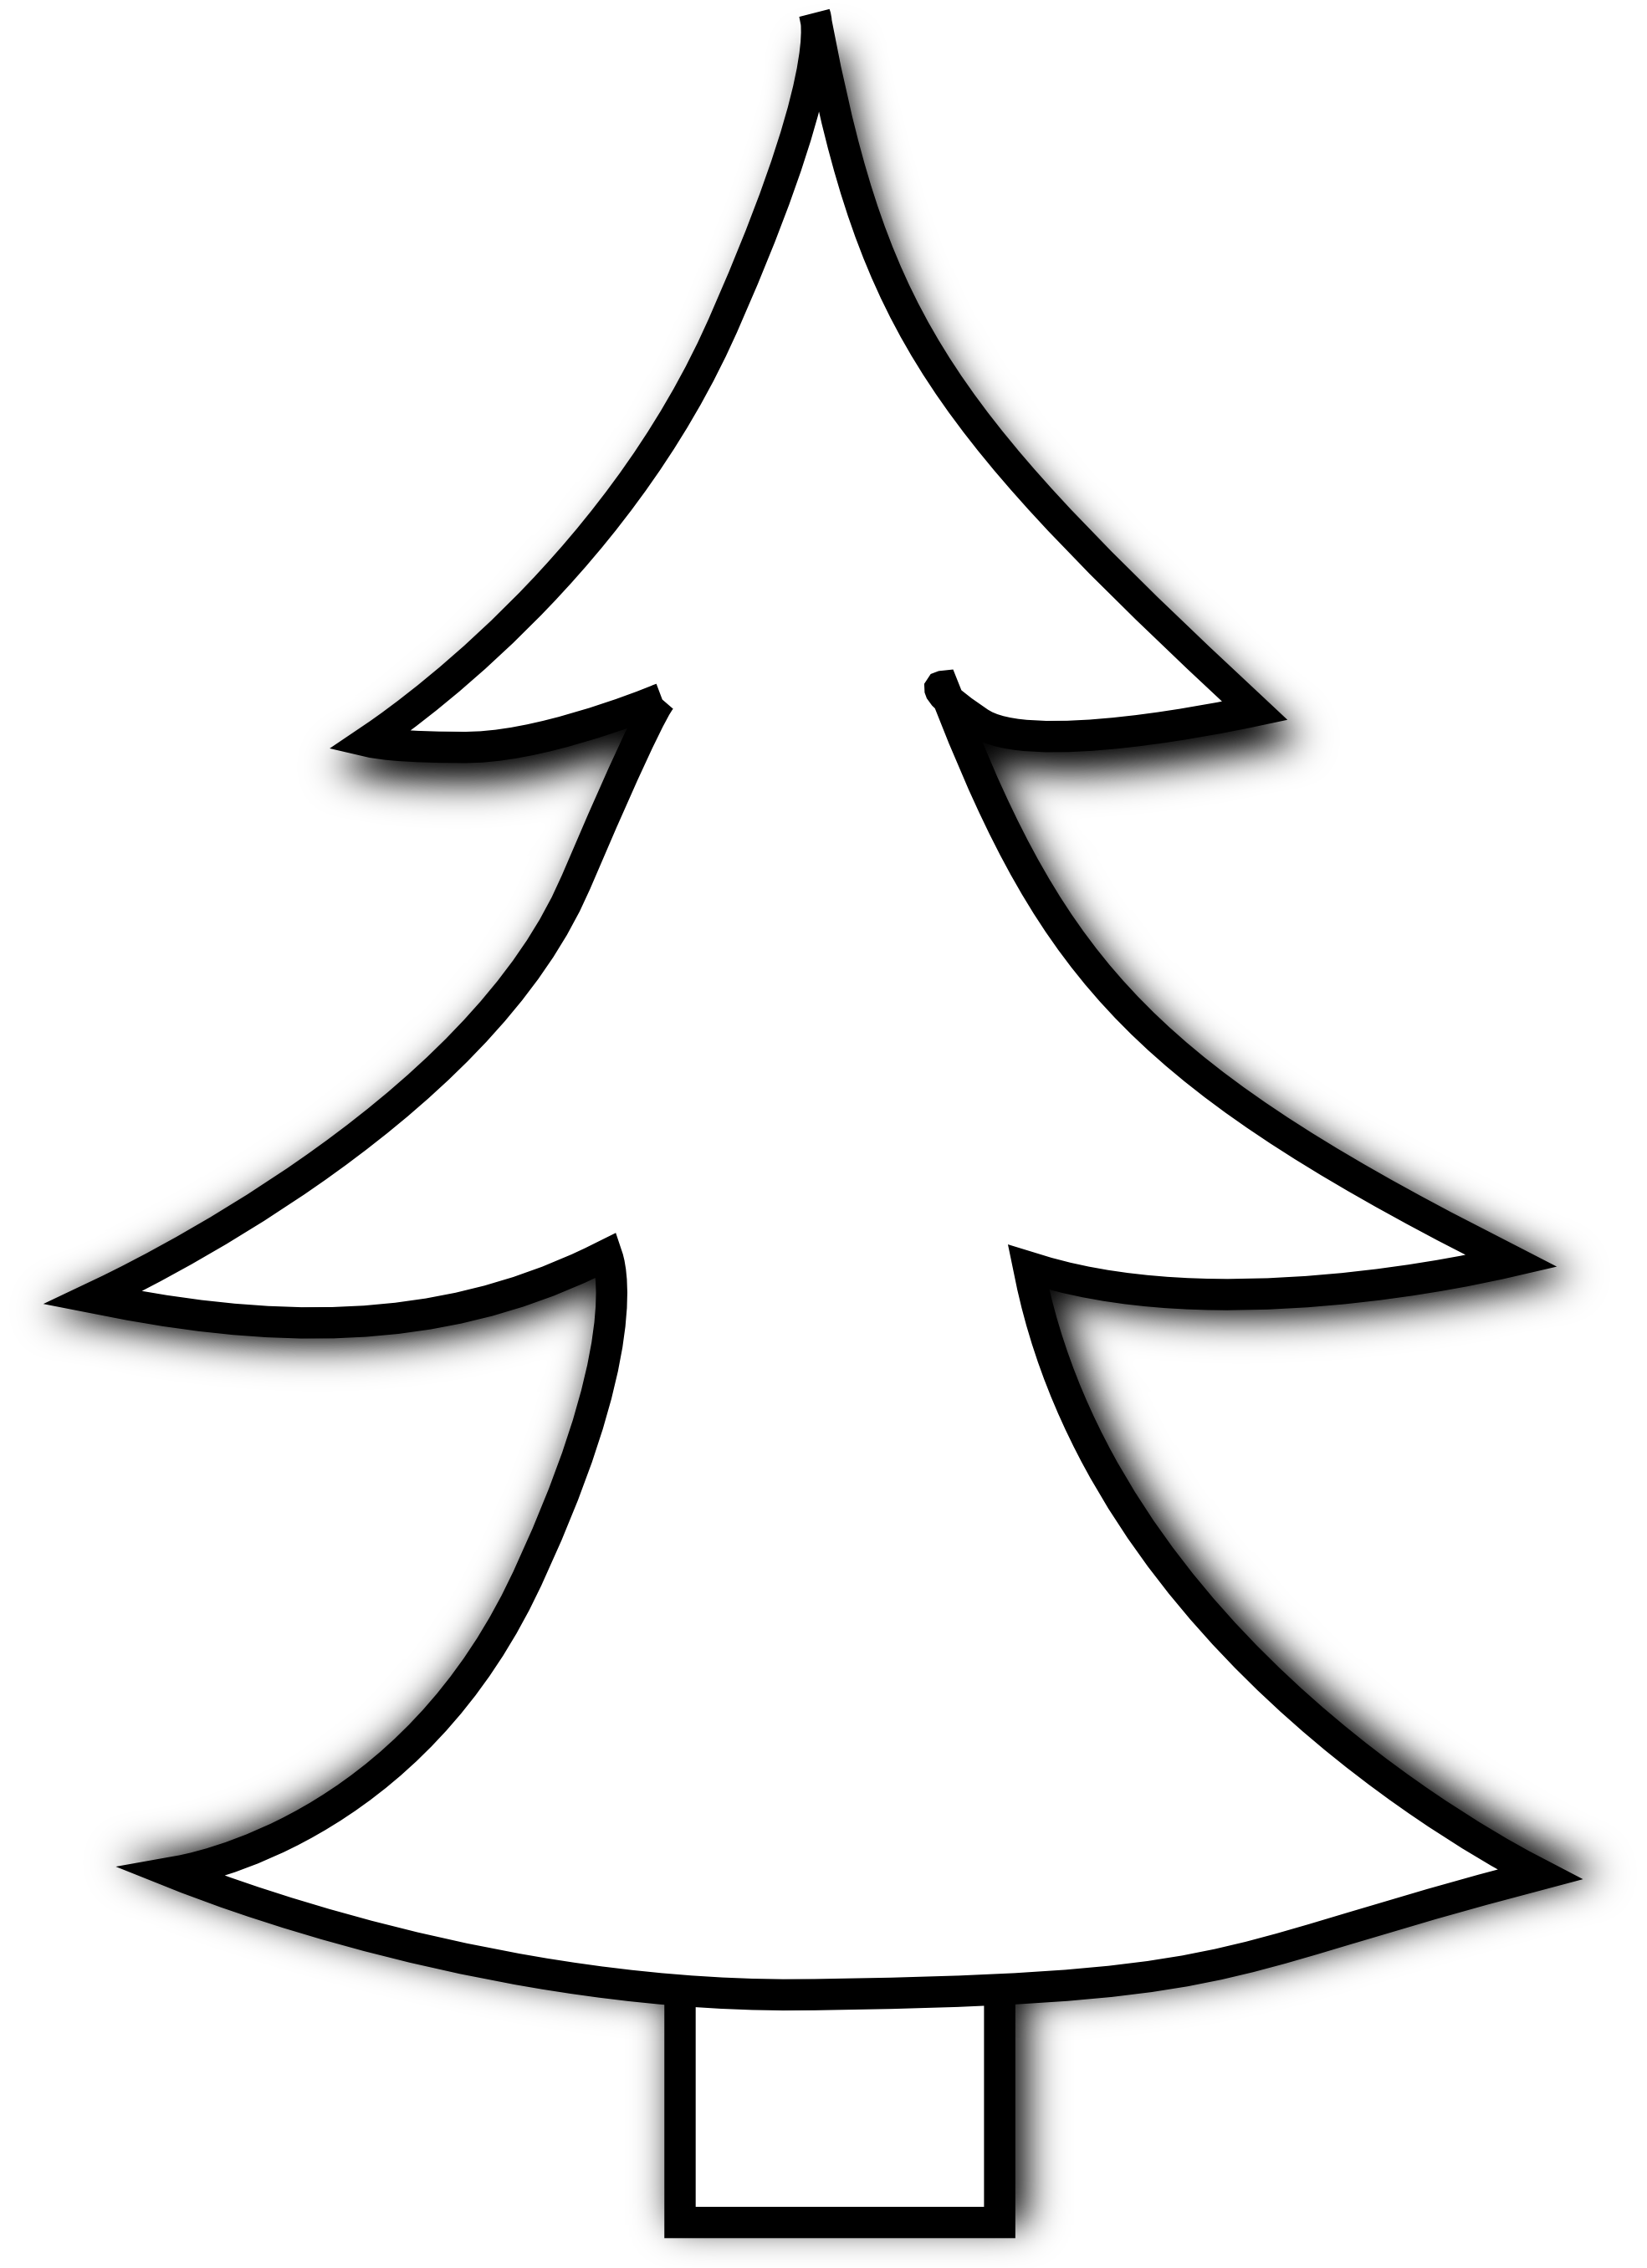 Christmas tree  black and white free black and white christmas tree clipart clipartfest